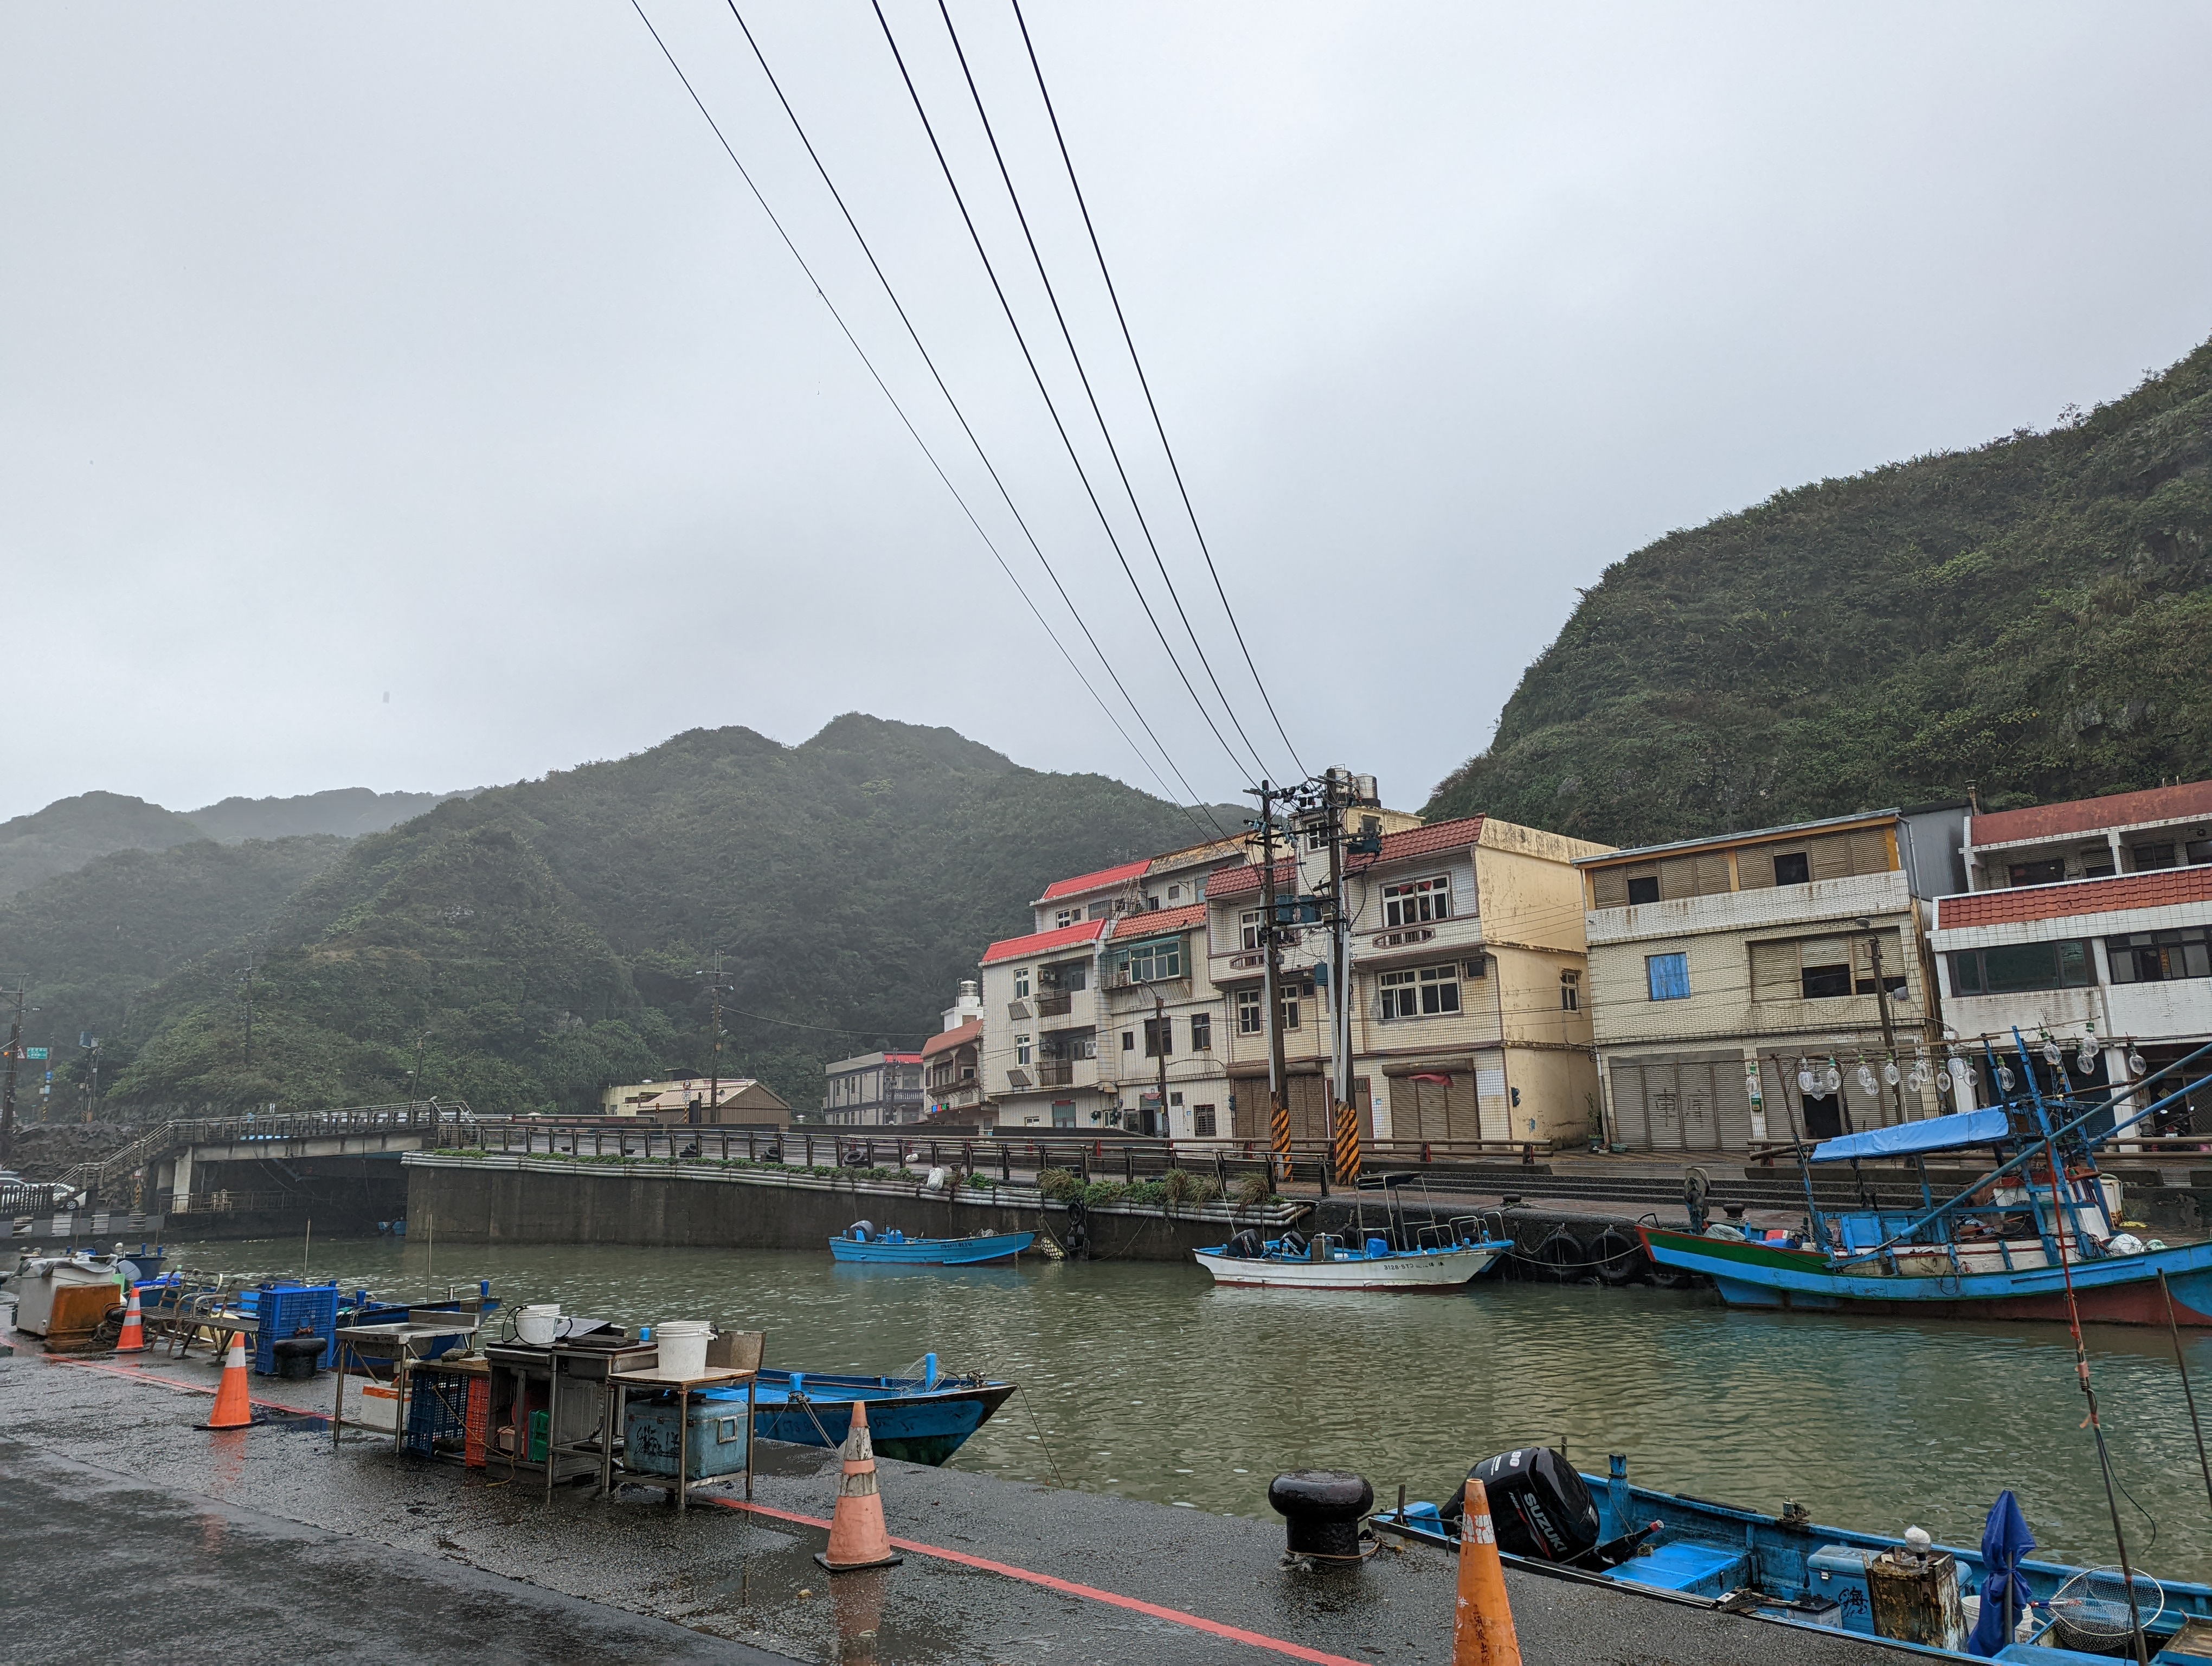 A photo of a small canal with some boats docked. Across the shore are some buildings, and mountains behind them. It's foggy, and some power lines stretch across the canal.